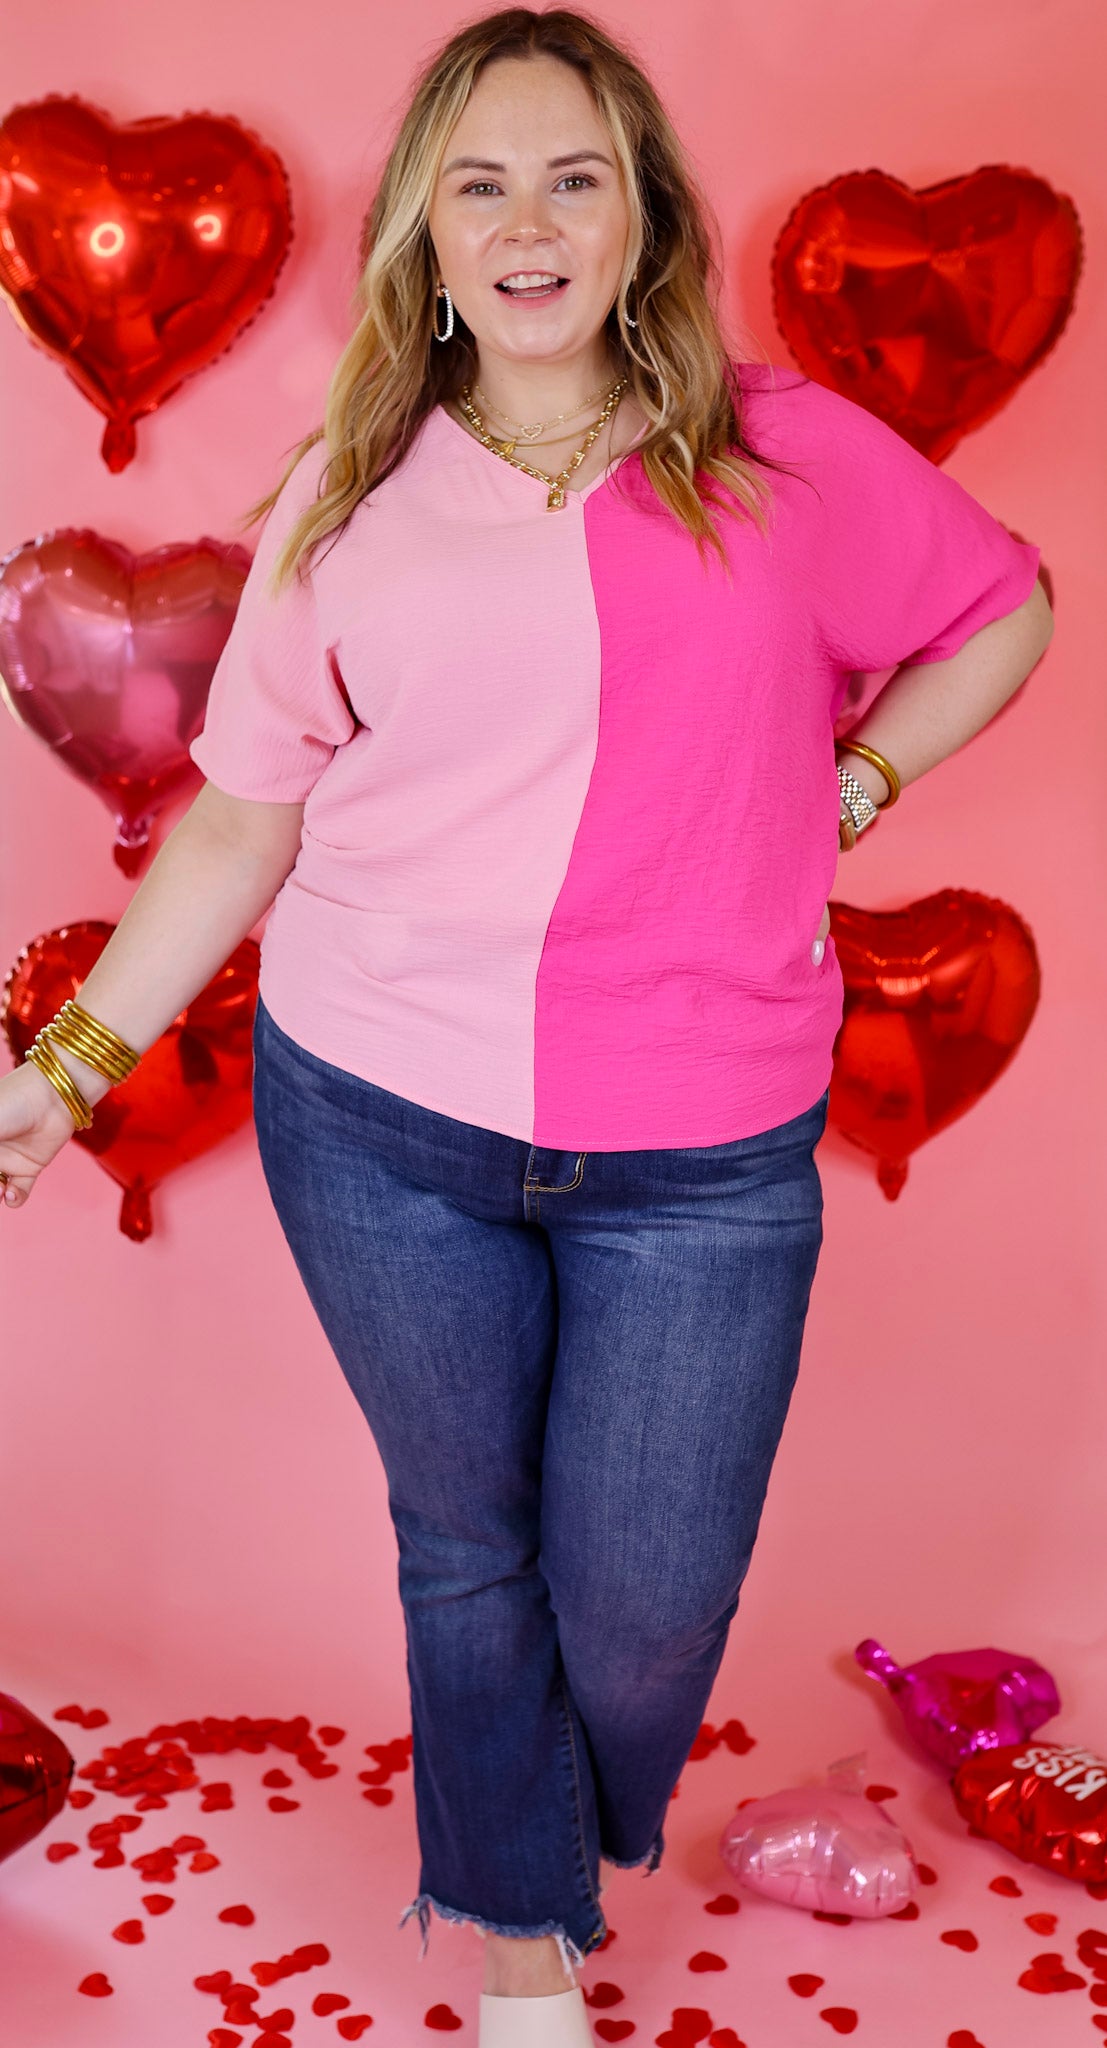 Lovely Dear V Neck Short Sleeve Color Block Top in Fuchsia and Light Pink - Giddy Up Glamour Boutique